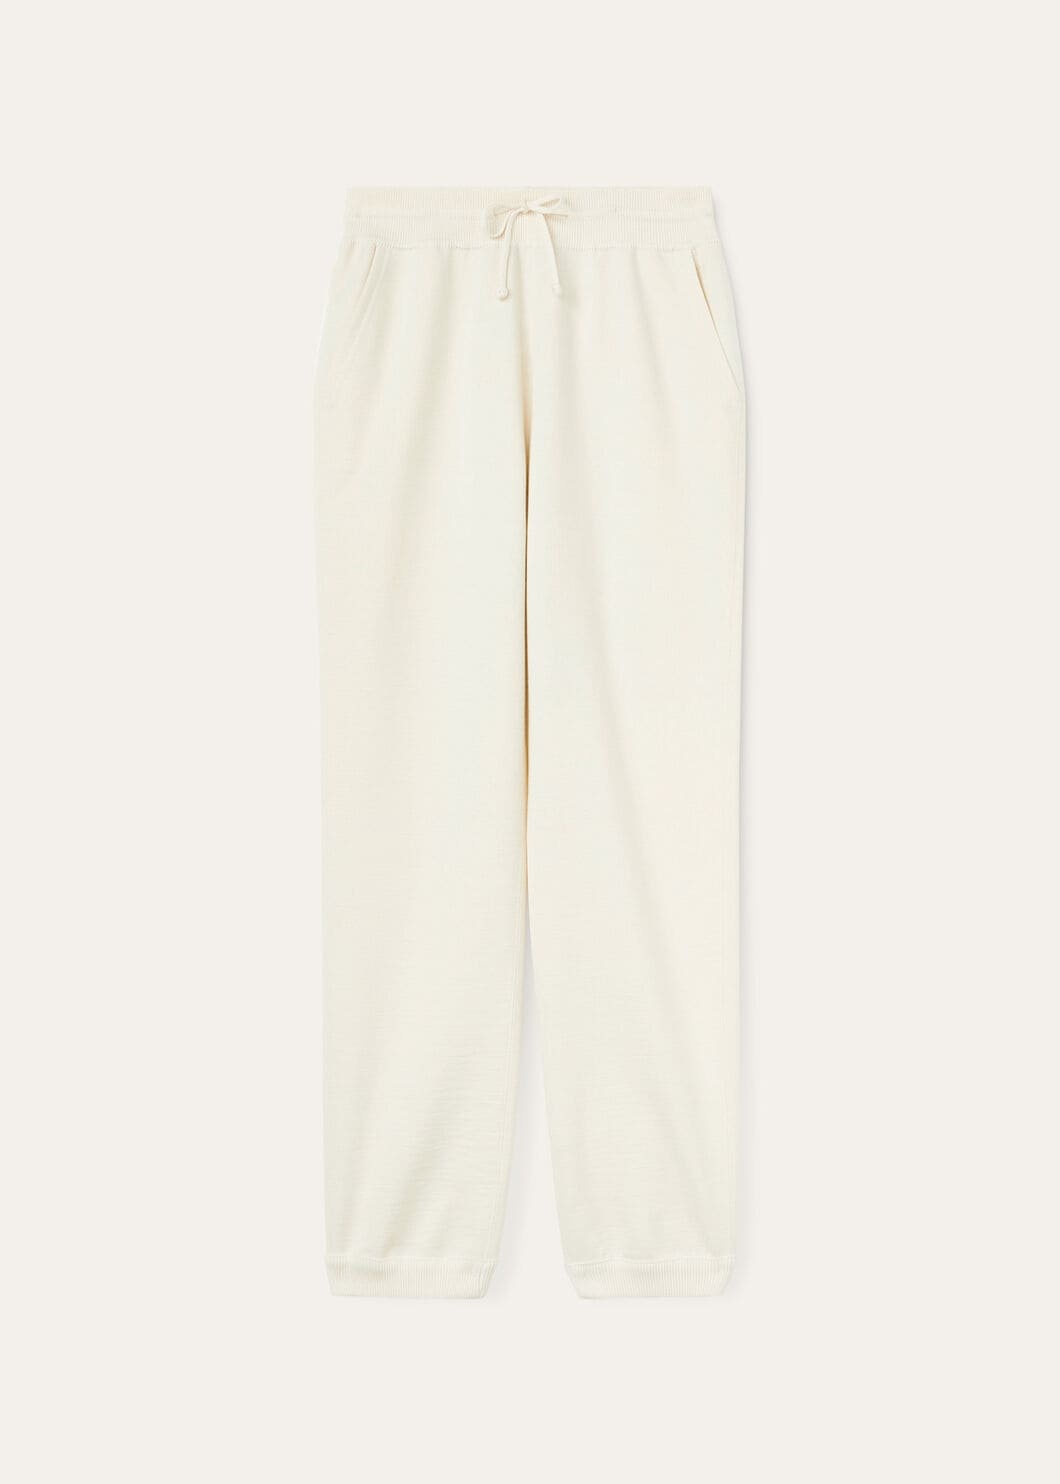 Cocooning Pants - 1